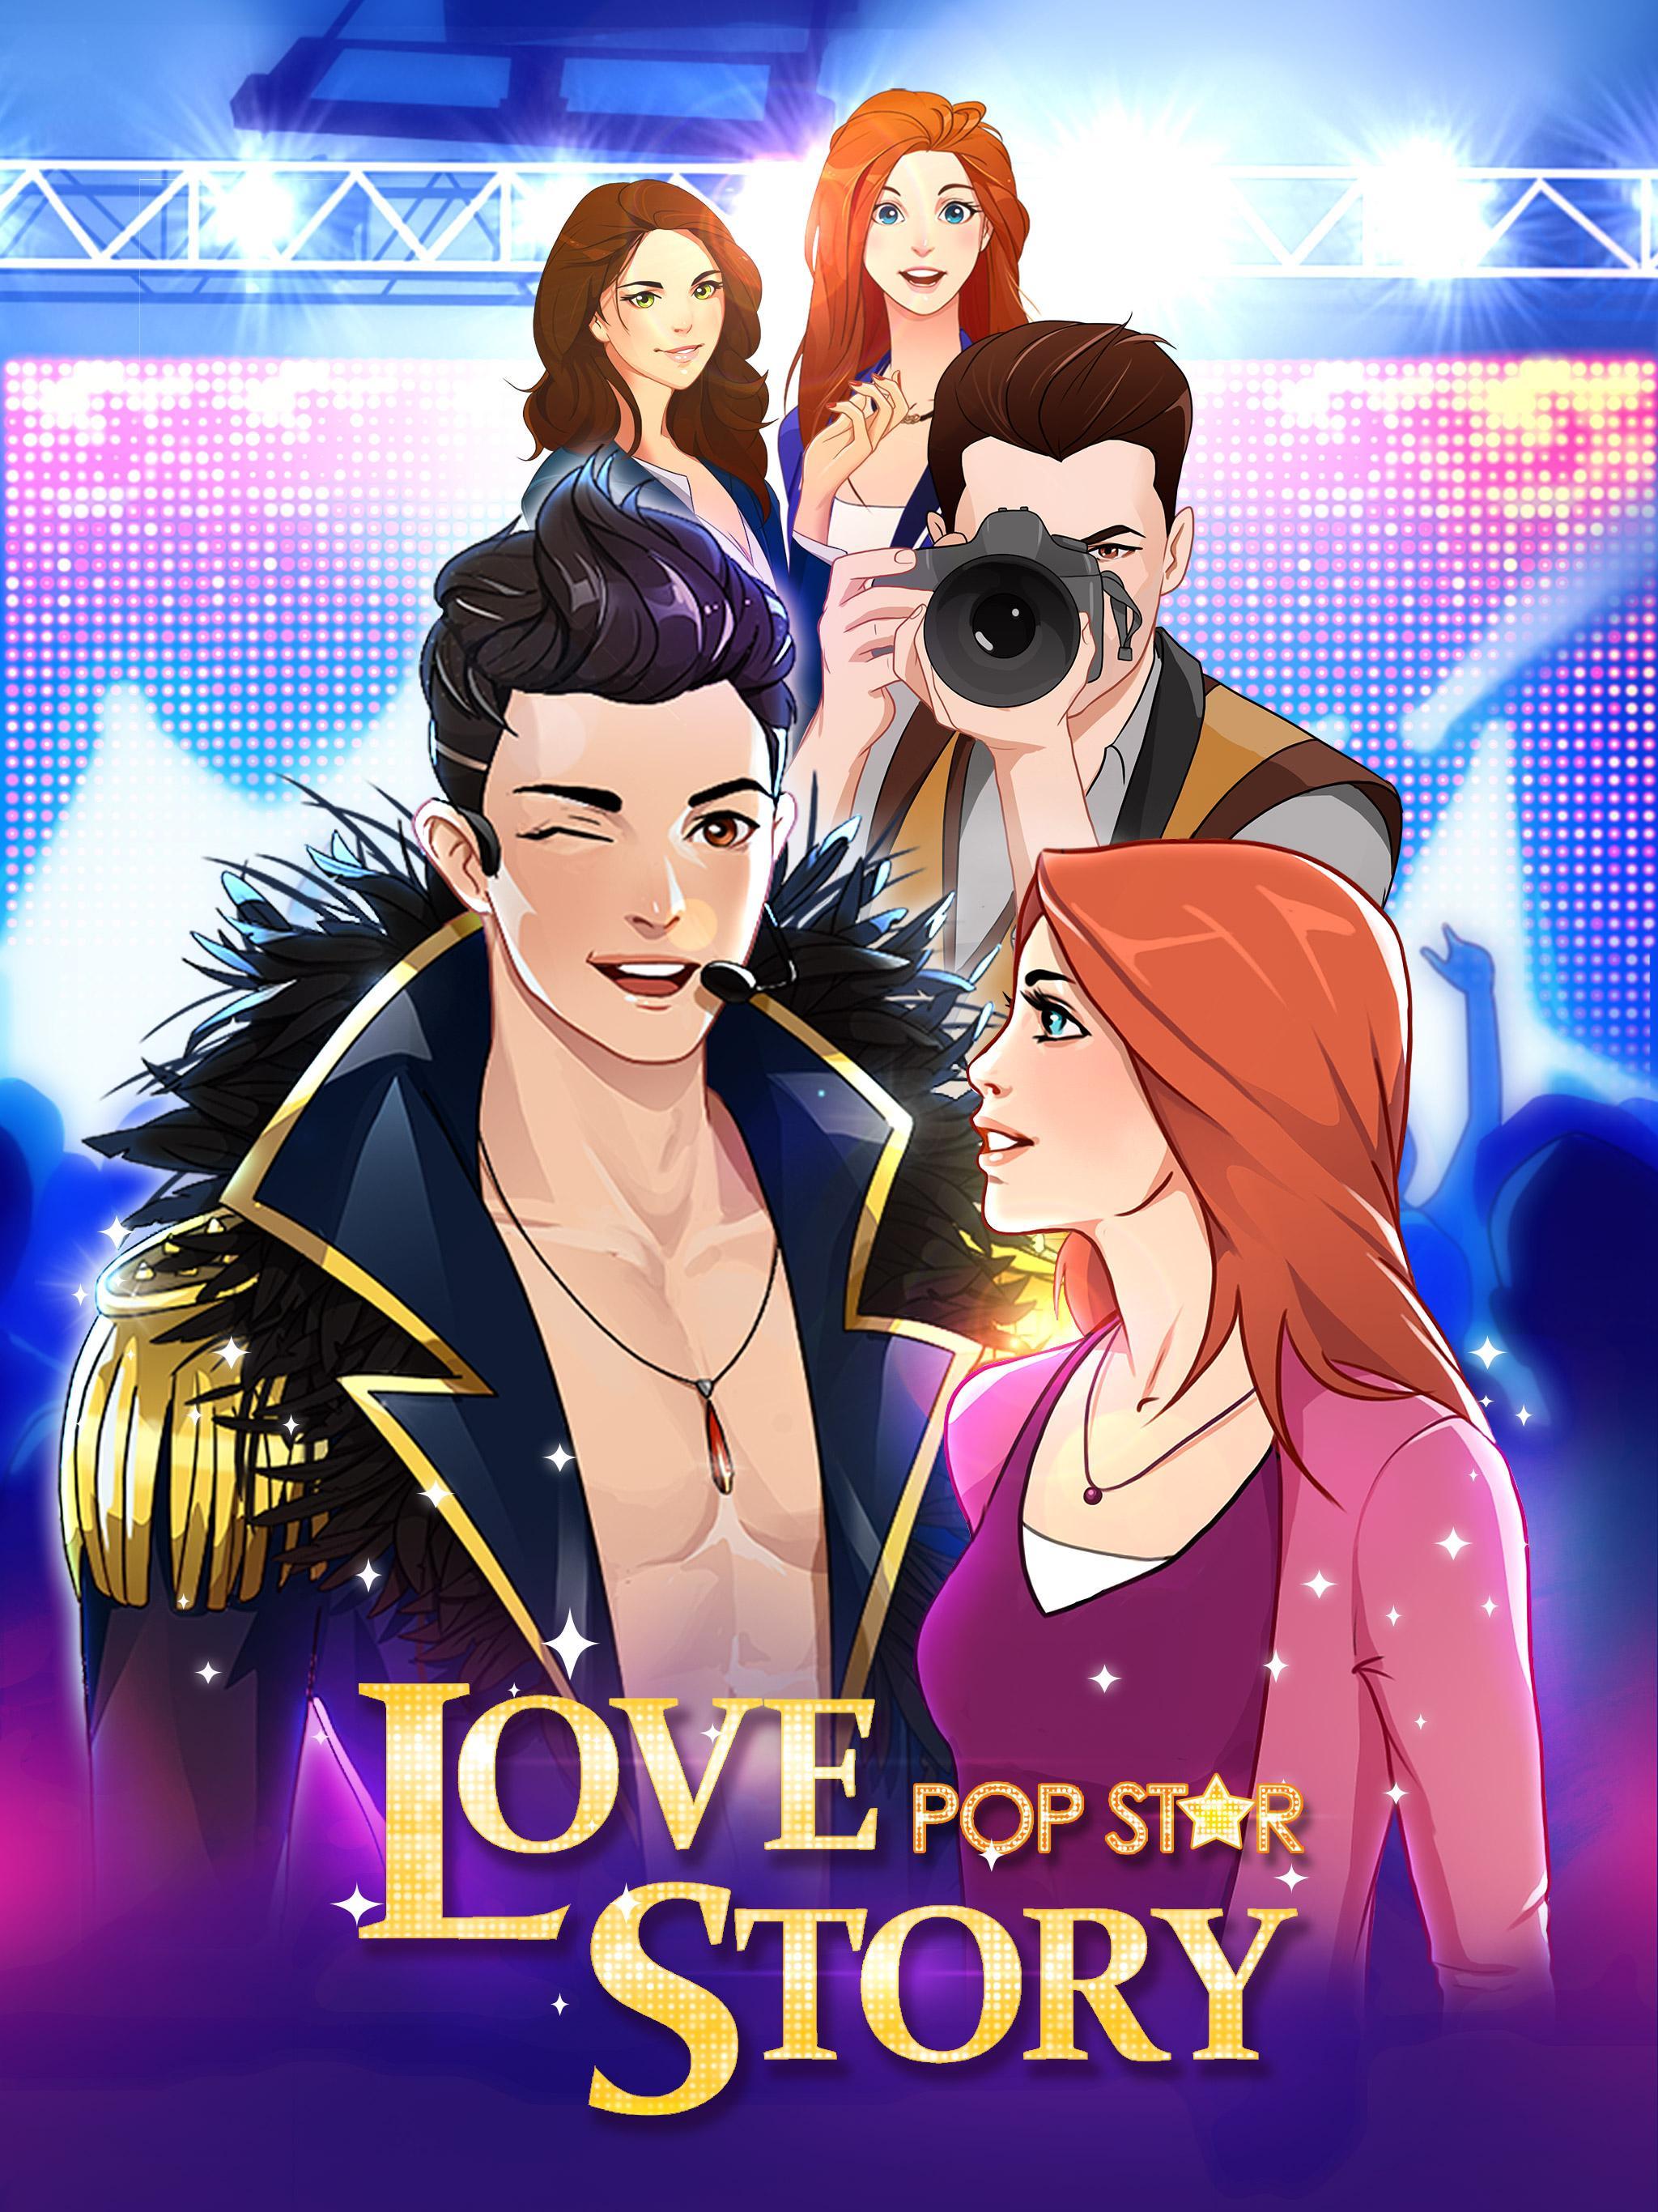 Read love stories. Love chat игра. Love story chat. Teen Love story персонажи. Love story game.